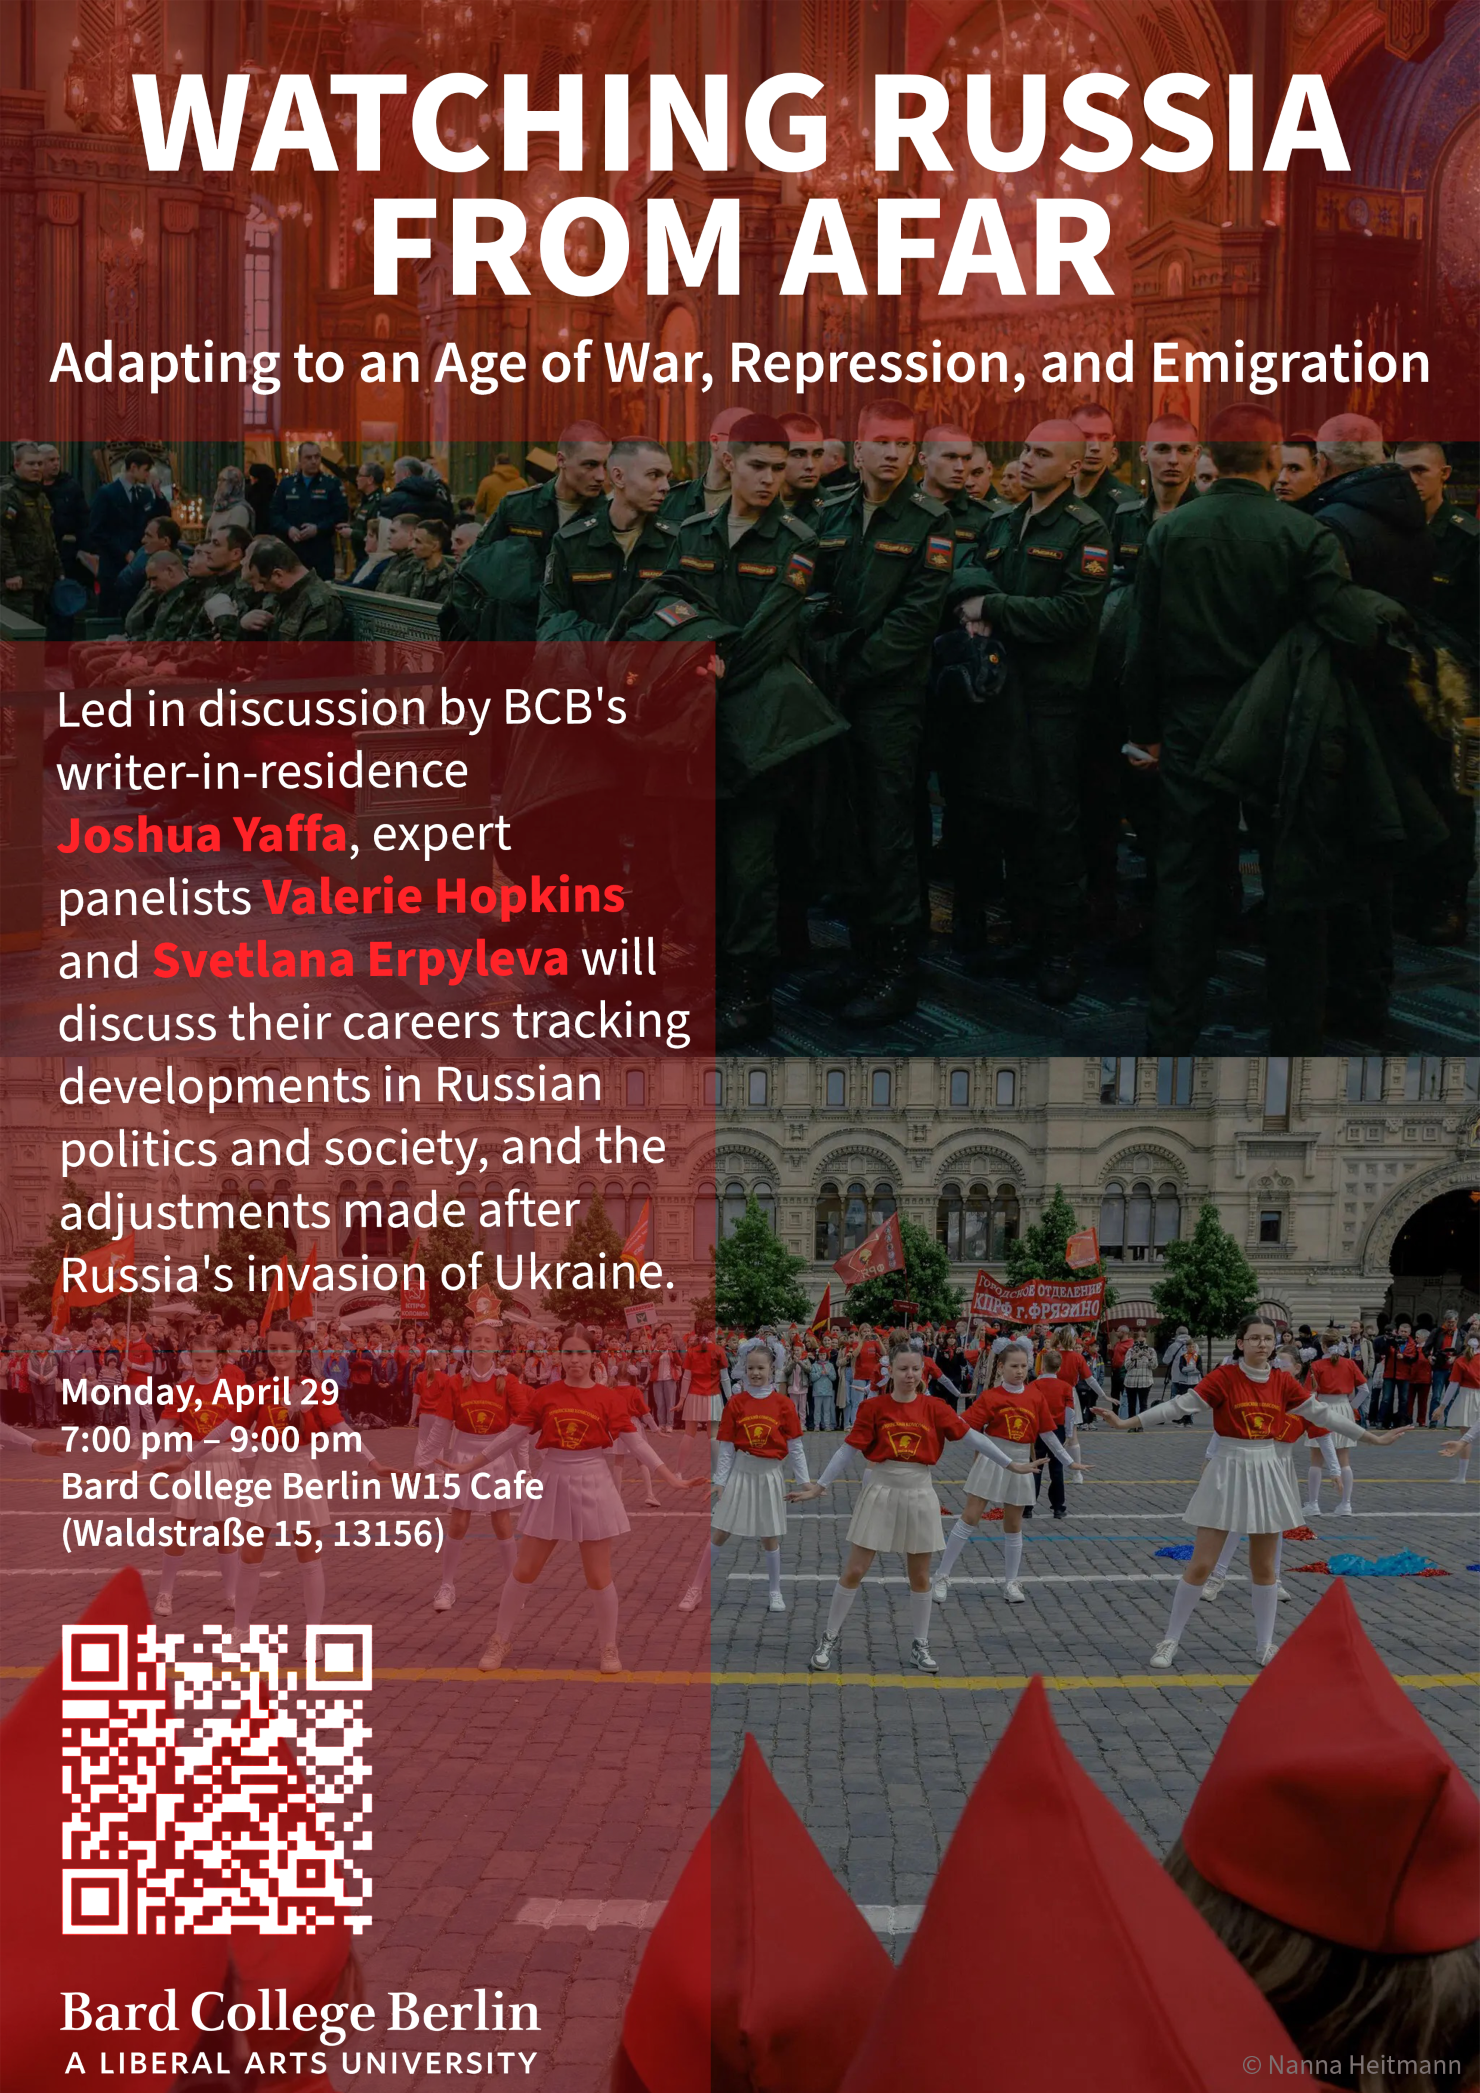 Watching Russia From Afar: Adapting to an Age of War, Repression, and Emigration